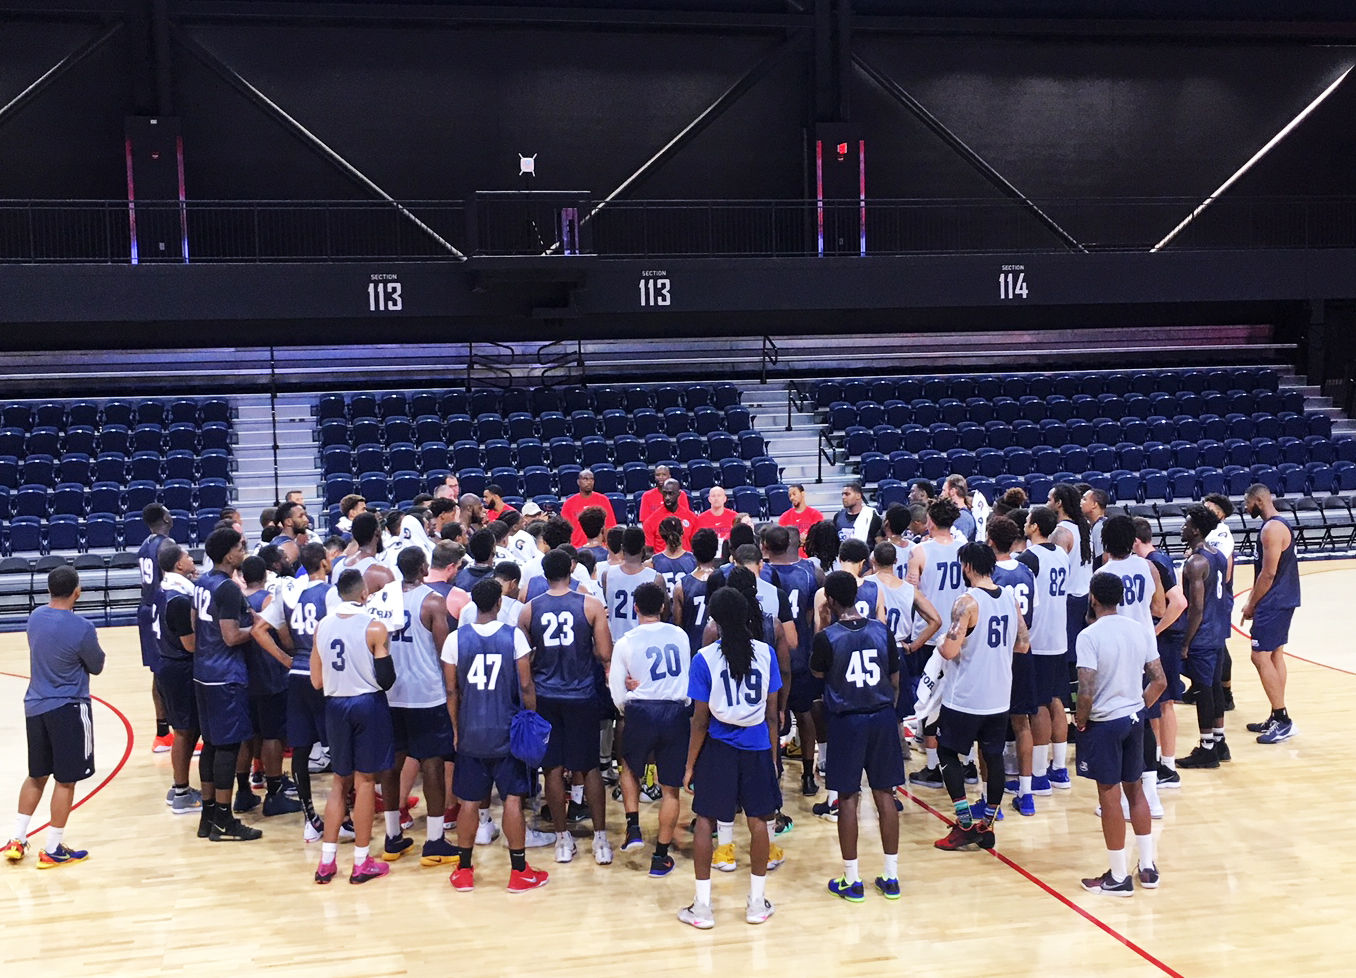 Mensah-Bonsu addressed the hopefuls after the morning tryout. He told WTOP he expects to sign three or four local players for this year's team. (WTOP/Noah Frank)